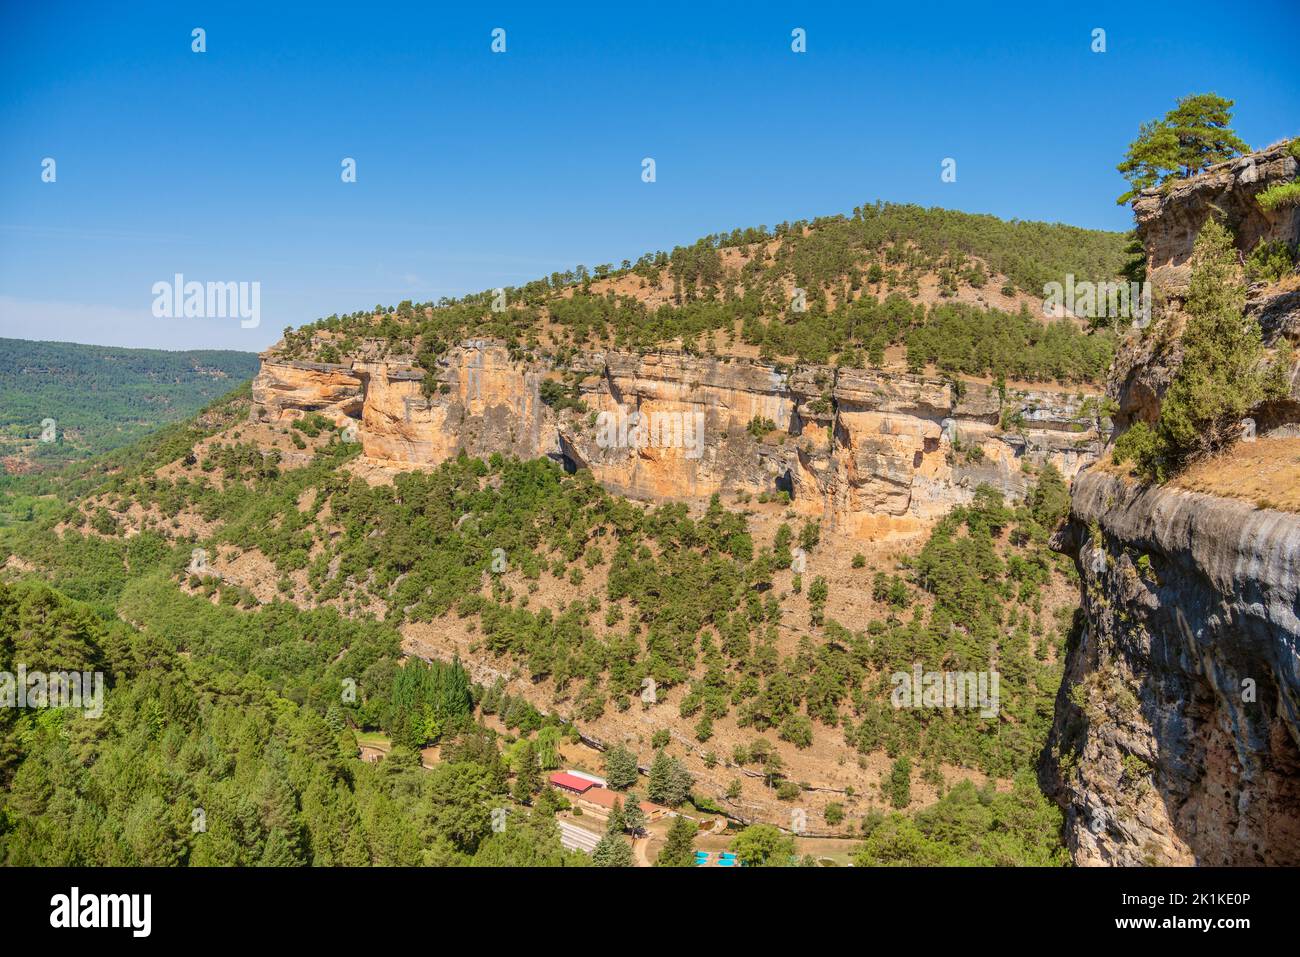 Landscape of the Serrania de Cuenca. Karst eroded by water and coniferous forests Stock Photo